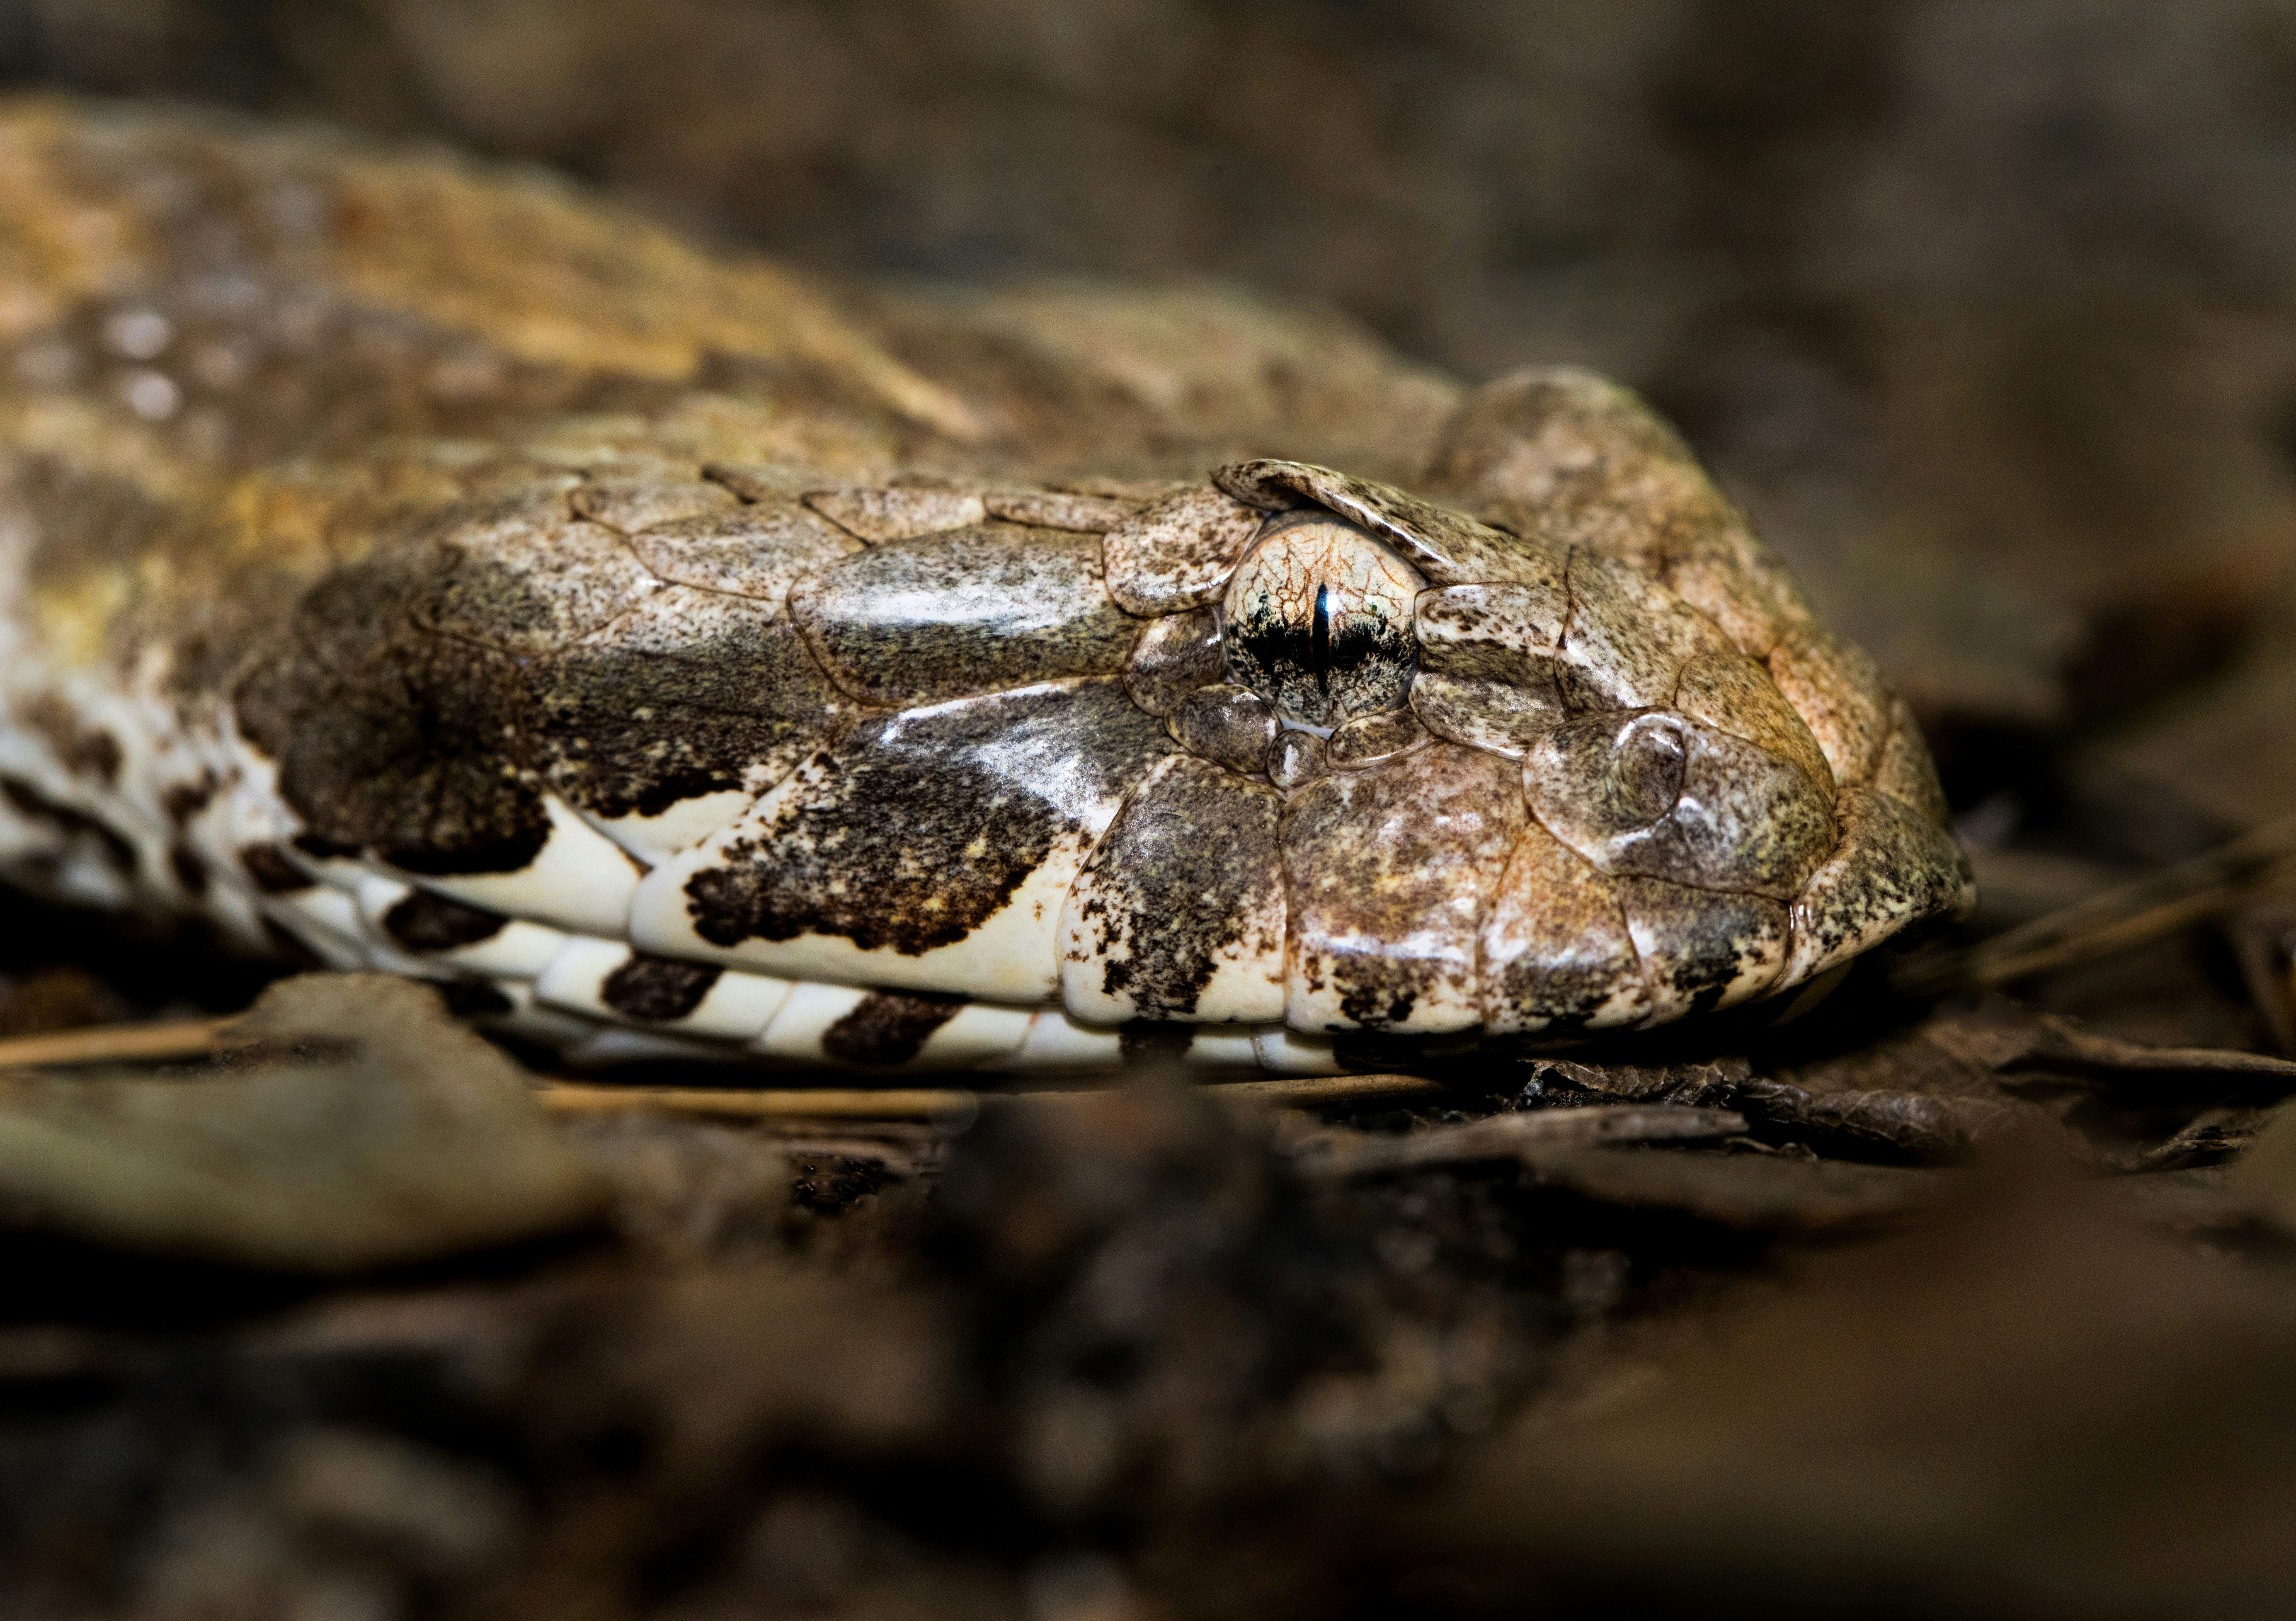 Macro photo showing the veins in the eye of an Australian Death Adder. These snakes are not actually adders, but are in the elapid group of snakes which includes cobras, mambas, taipans, tiger snakes, etc. They do however occupy the same ecological niche and dry habitats as some of the smaller adder species in Africa and Asia, and small pit vipers in the Americas.